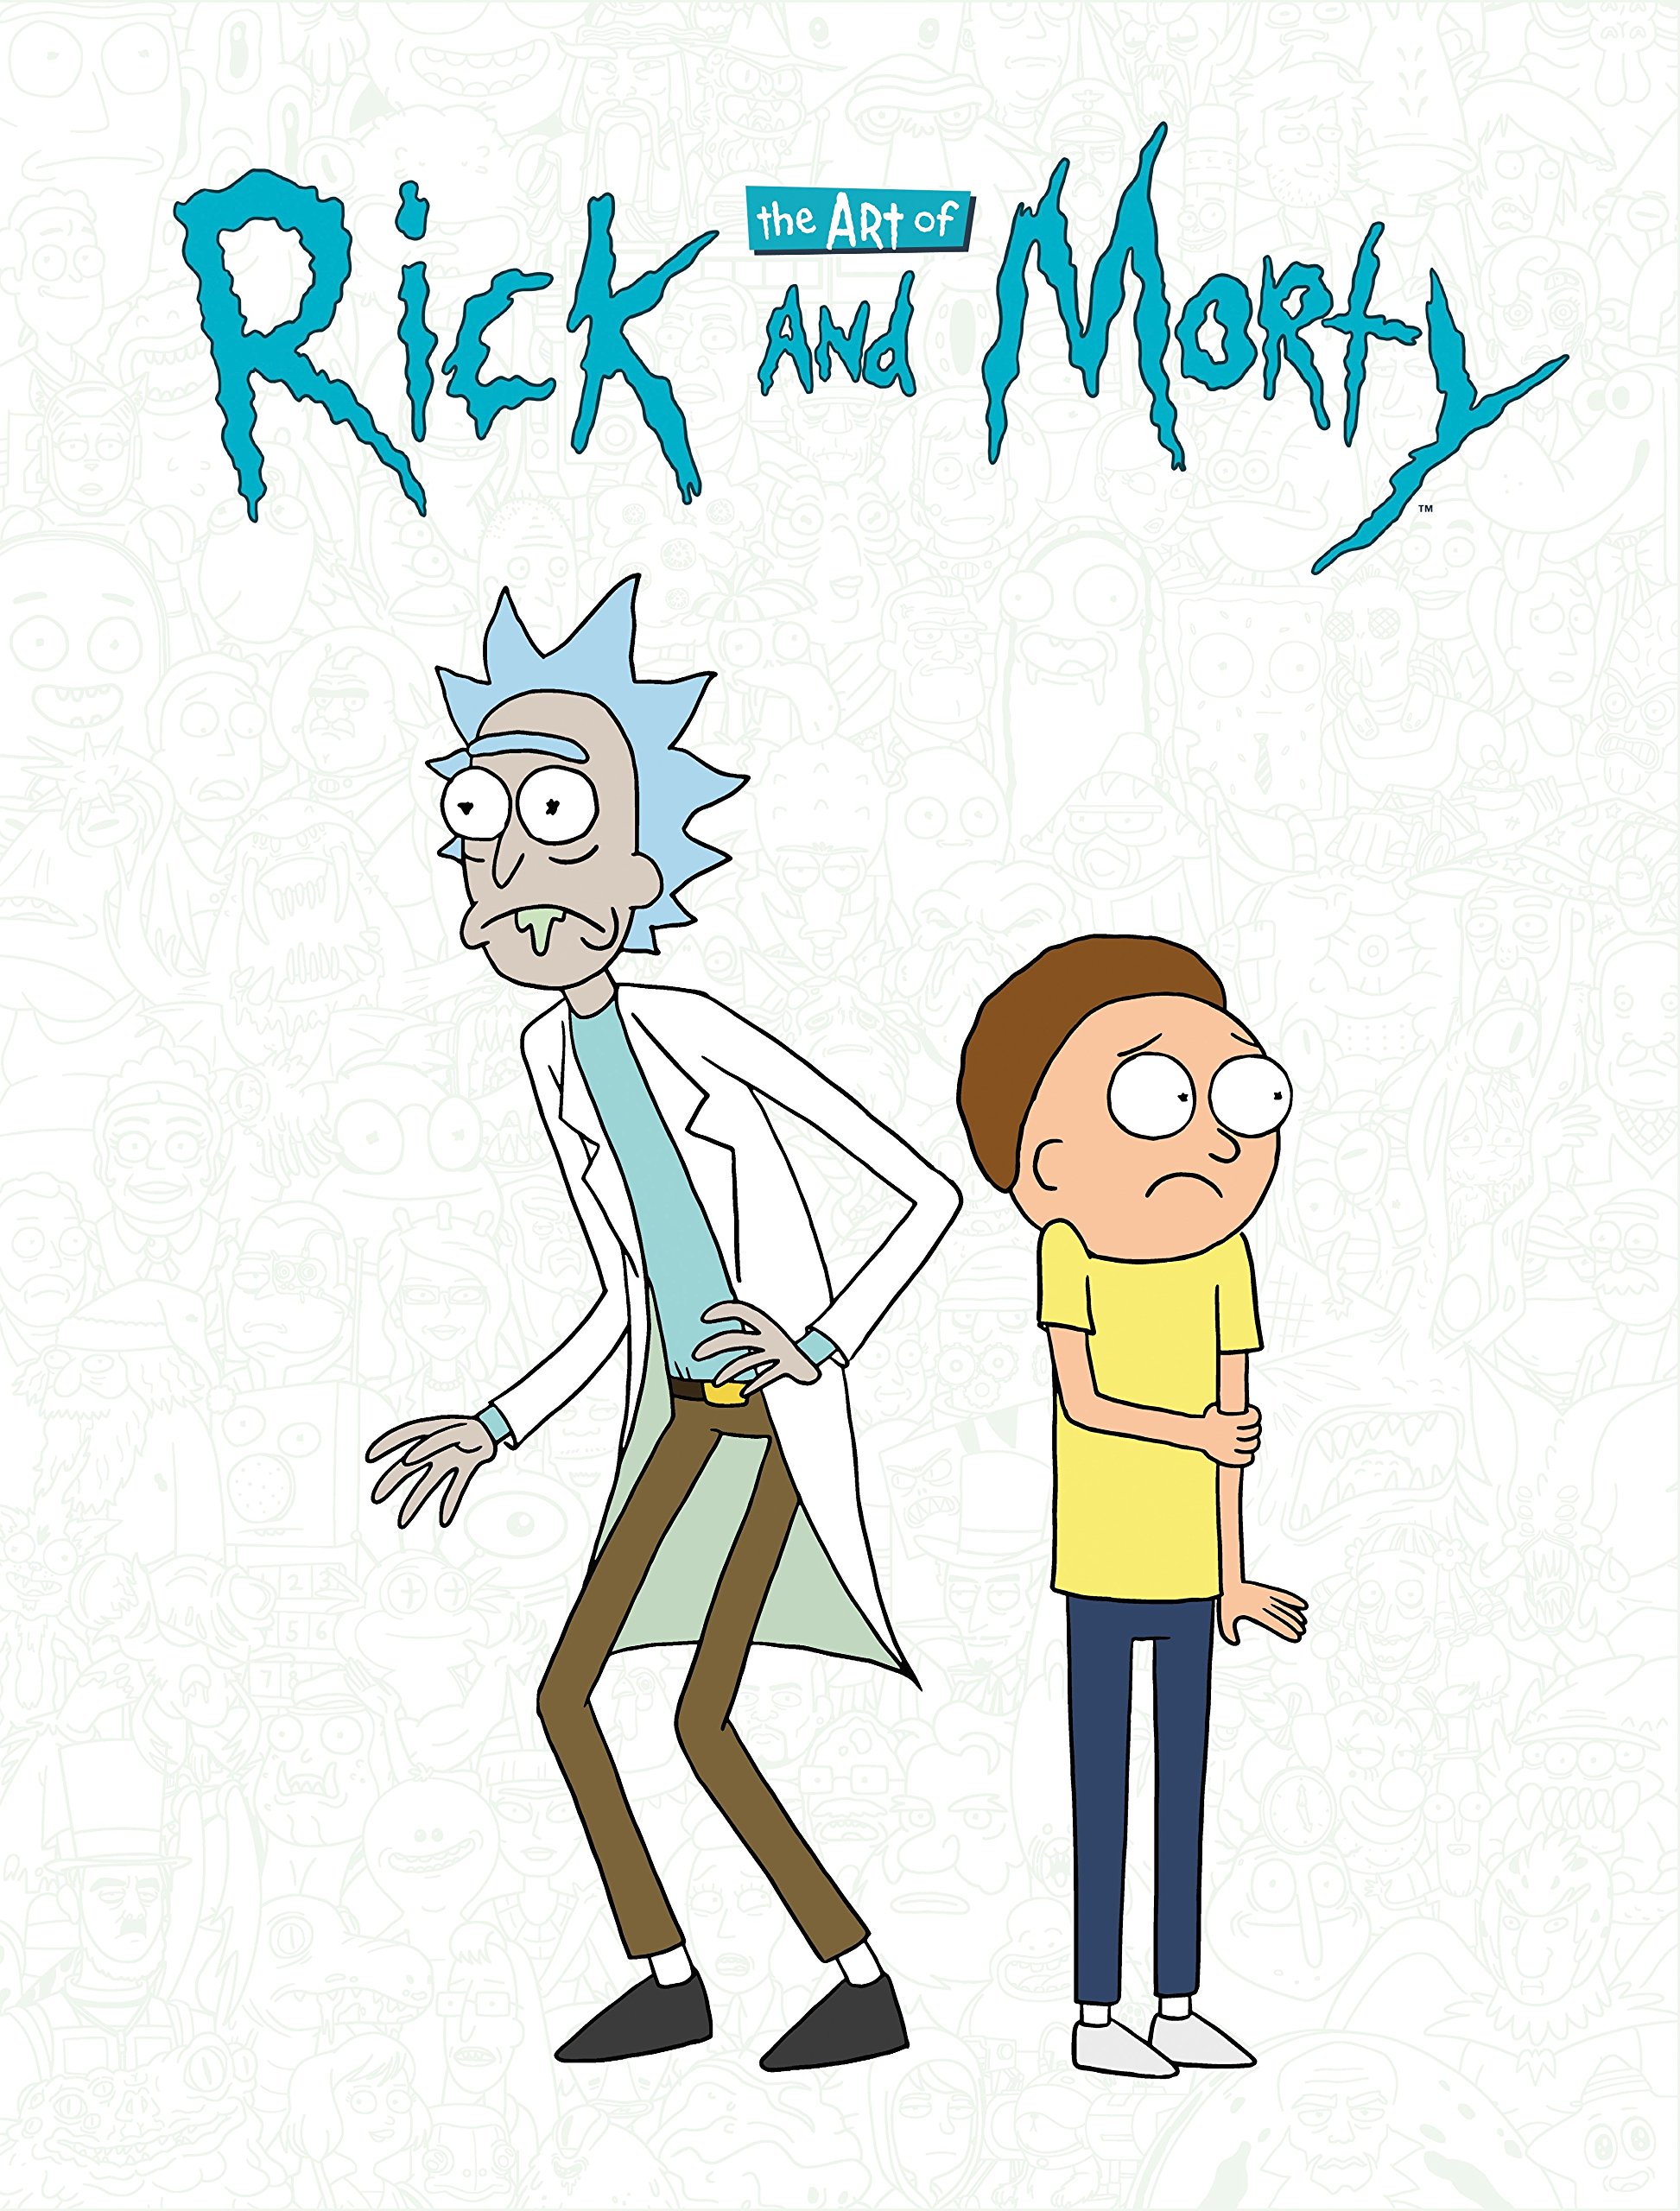 The Art of Rick and Morty Hardcover Book Preview